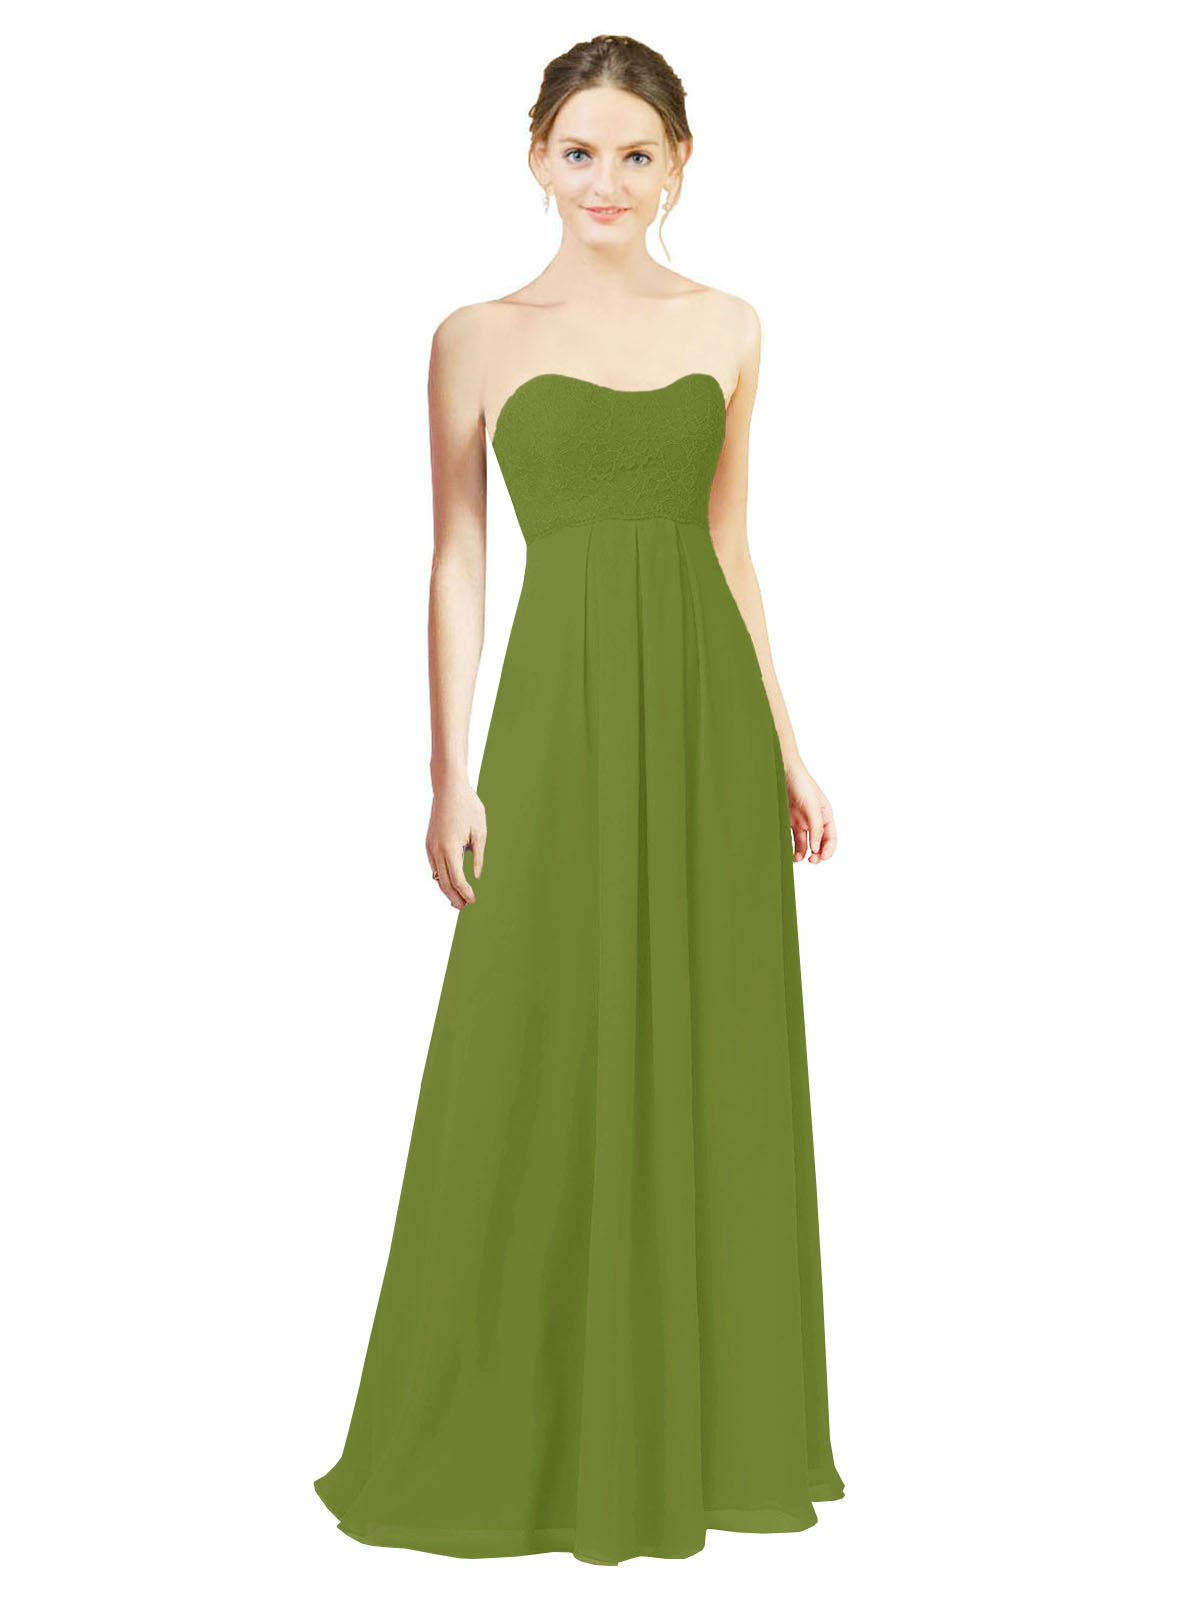 Olive Green A-Line Sweetheart Strapless Long Bridesmaid Dress Melany